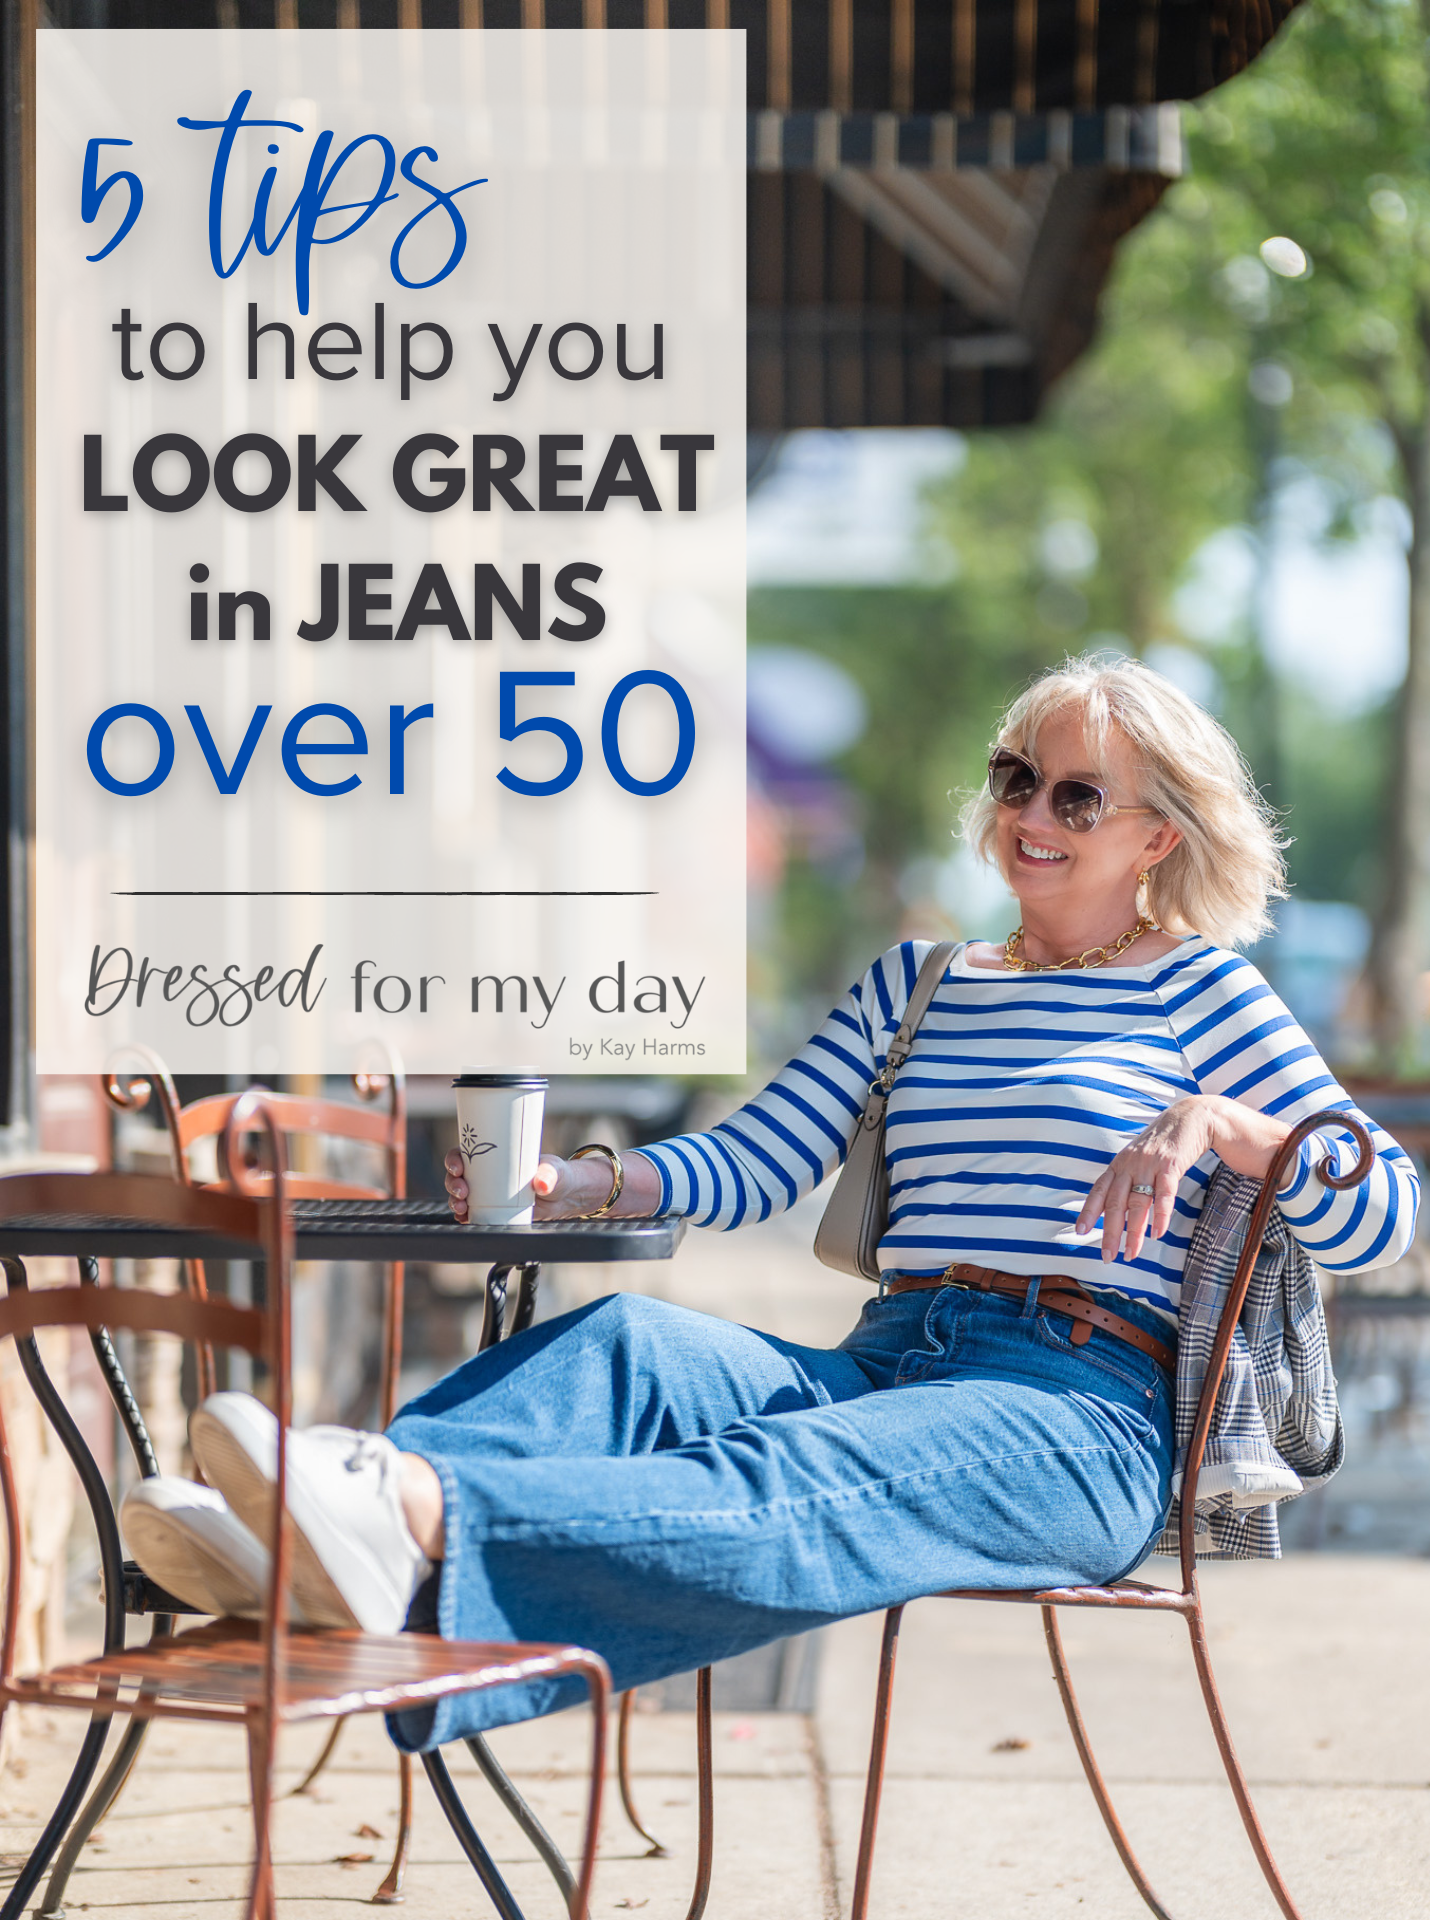 5 tips to help you look great in jeans over 50